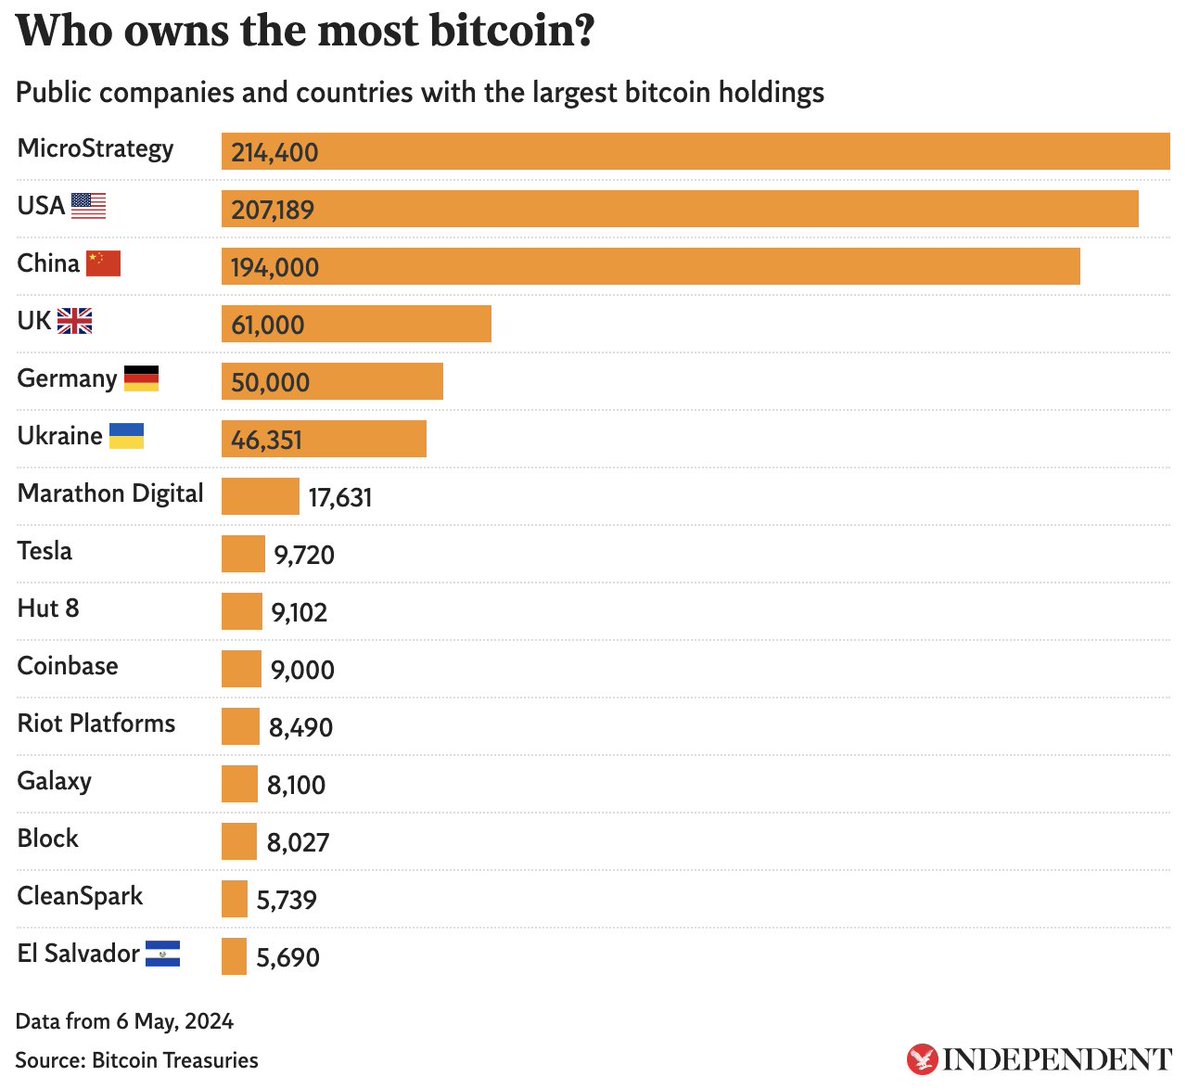 MicroStrategy holds more than 1% of all #bitcoins in existence and it also owns more #bitcoin than the US.